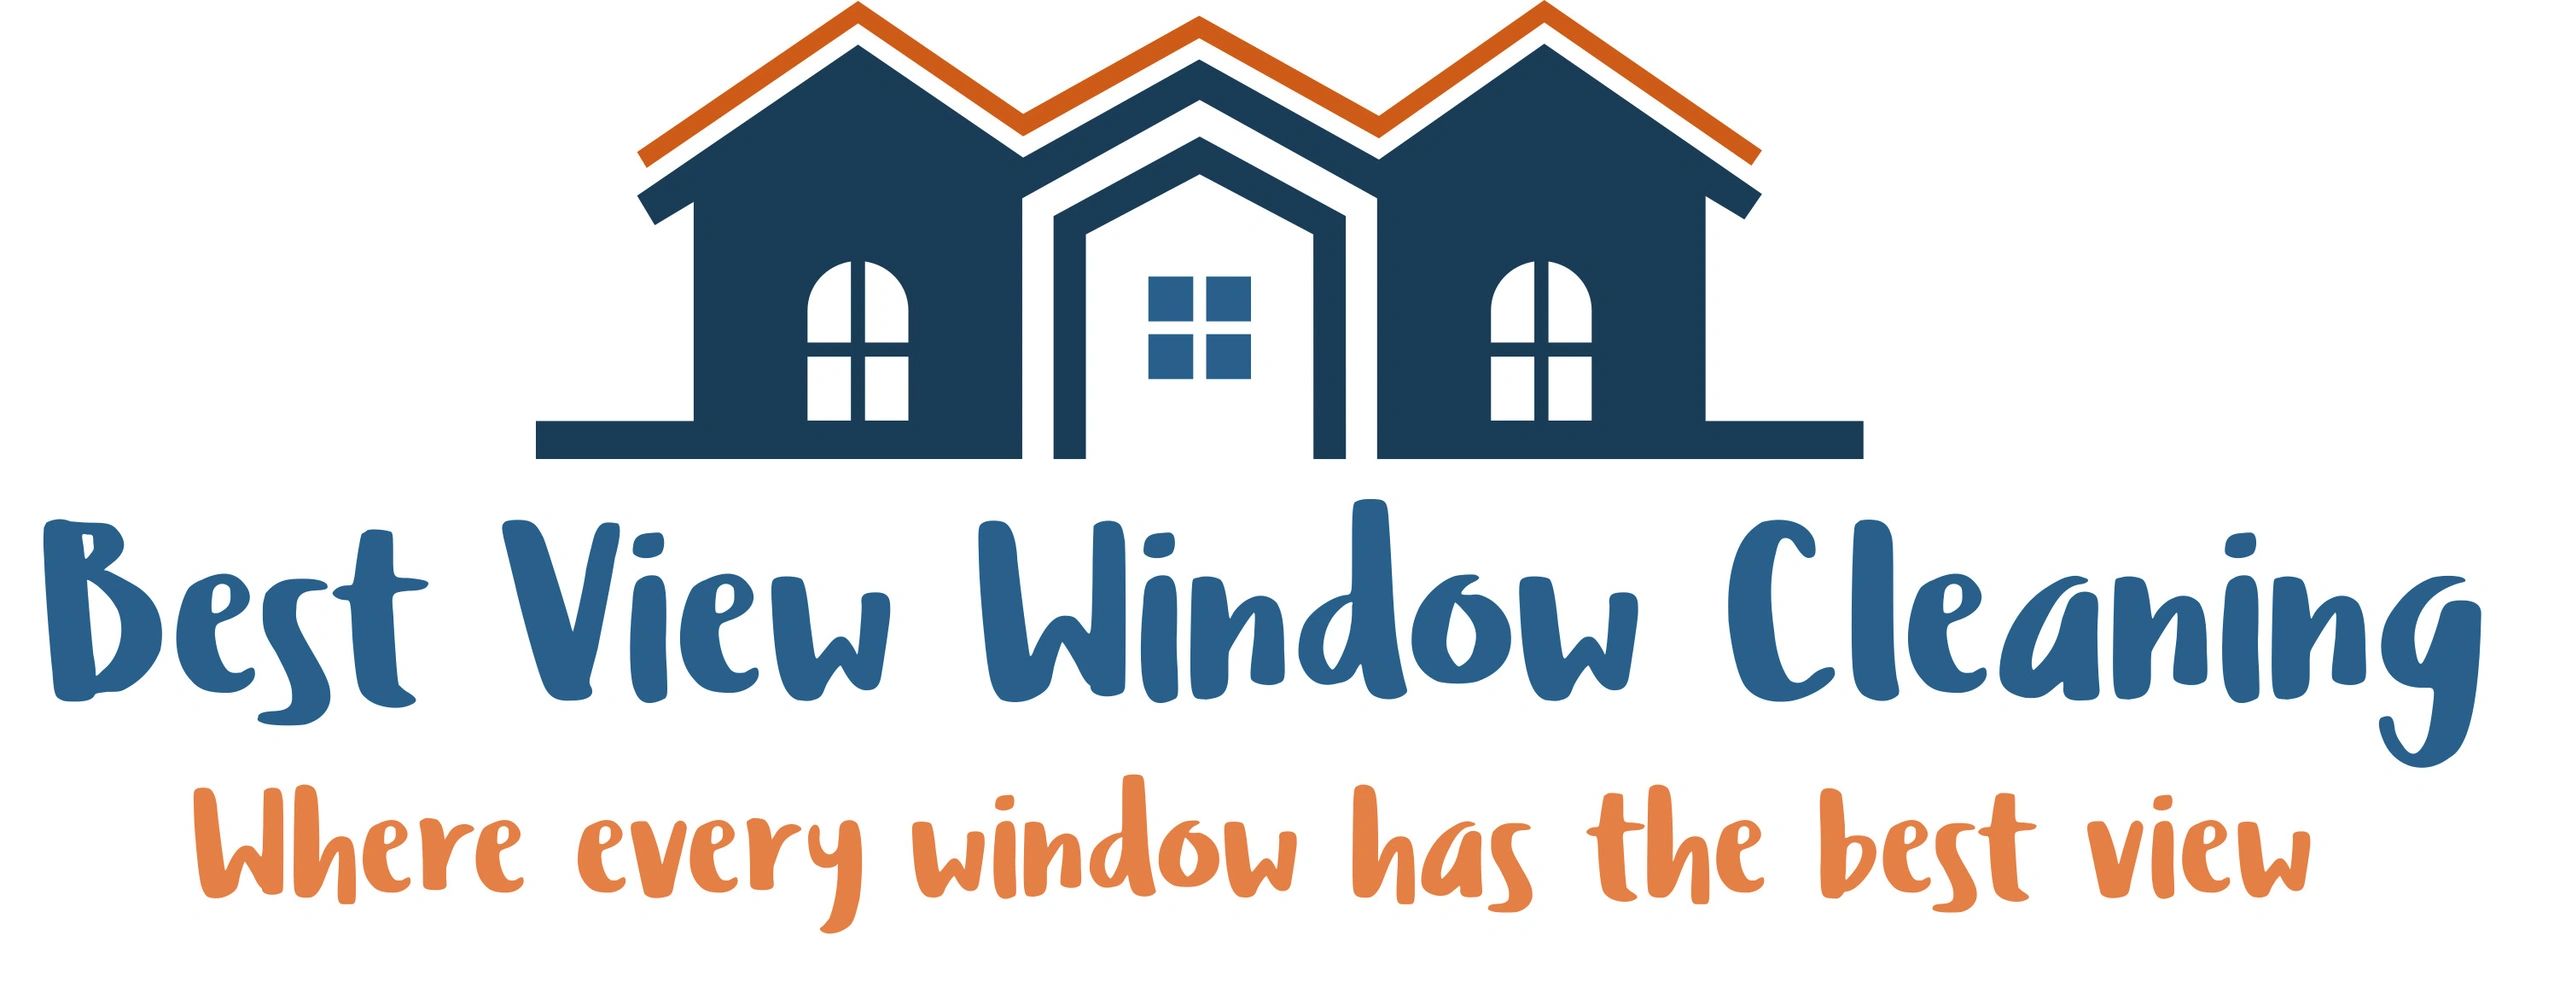 When Is the Best Time to Schedule a Residential Window Cleaning? - Galaxy Window  Cleaning, LLC